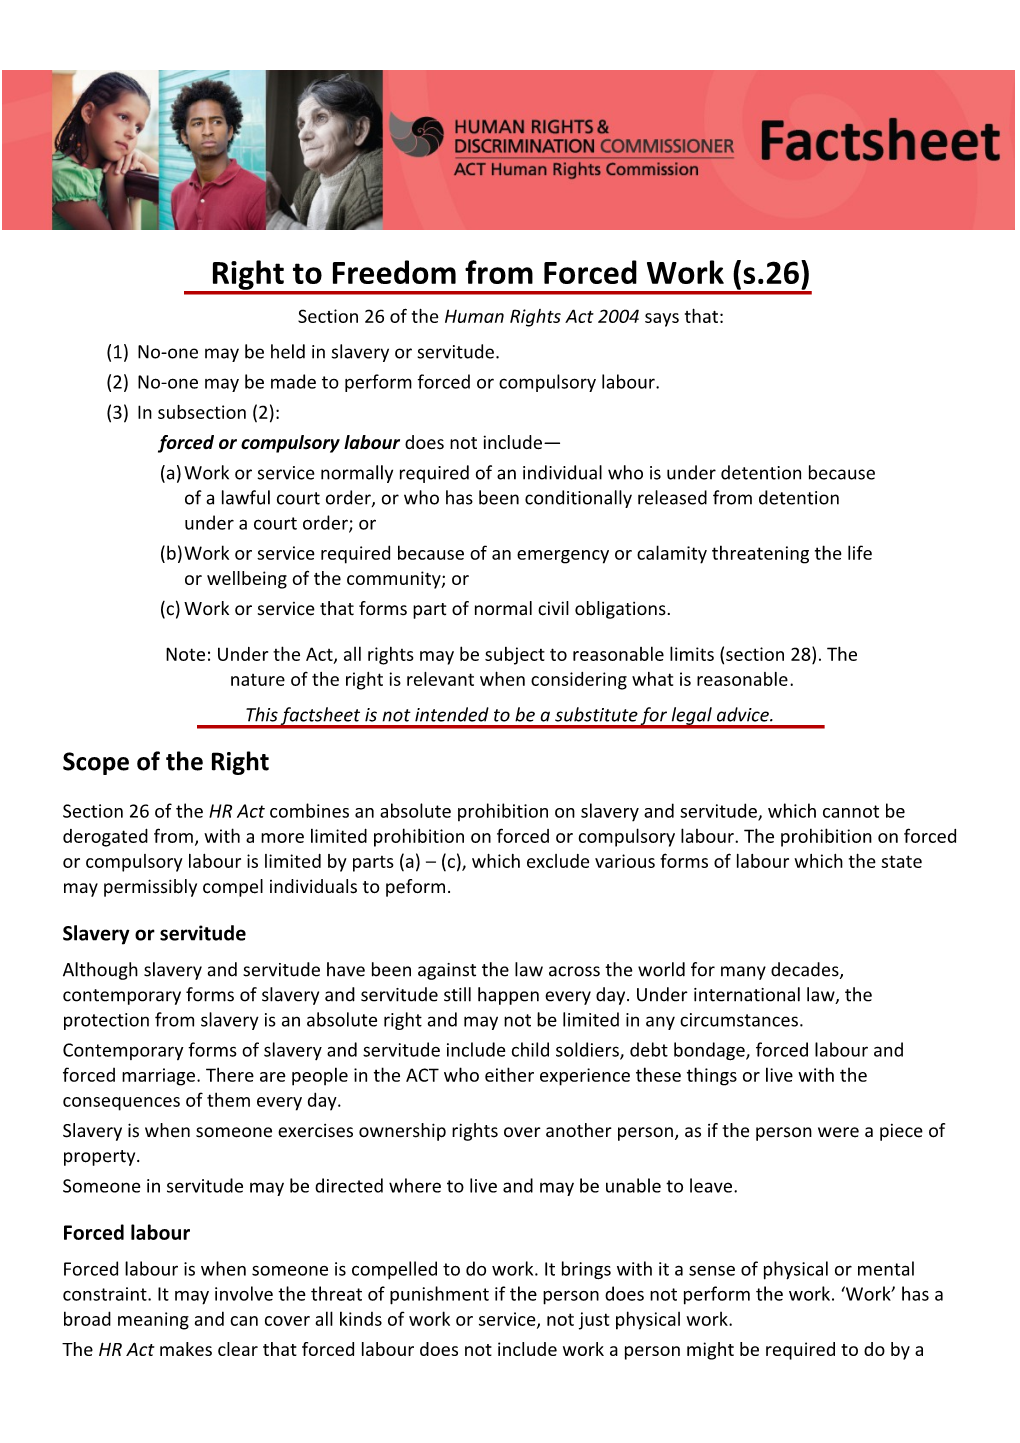 Freedom from Forced Work